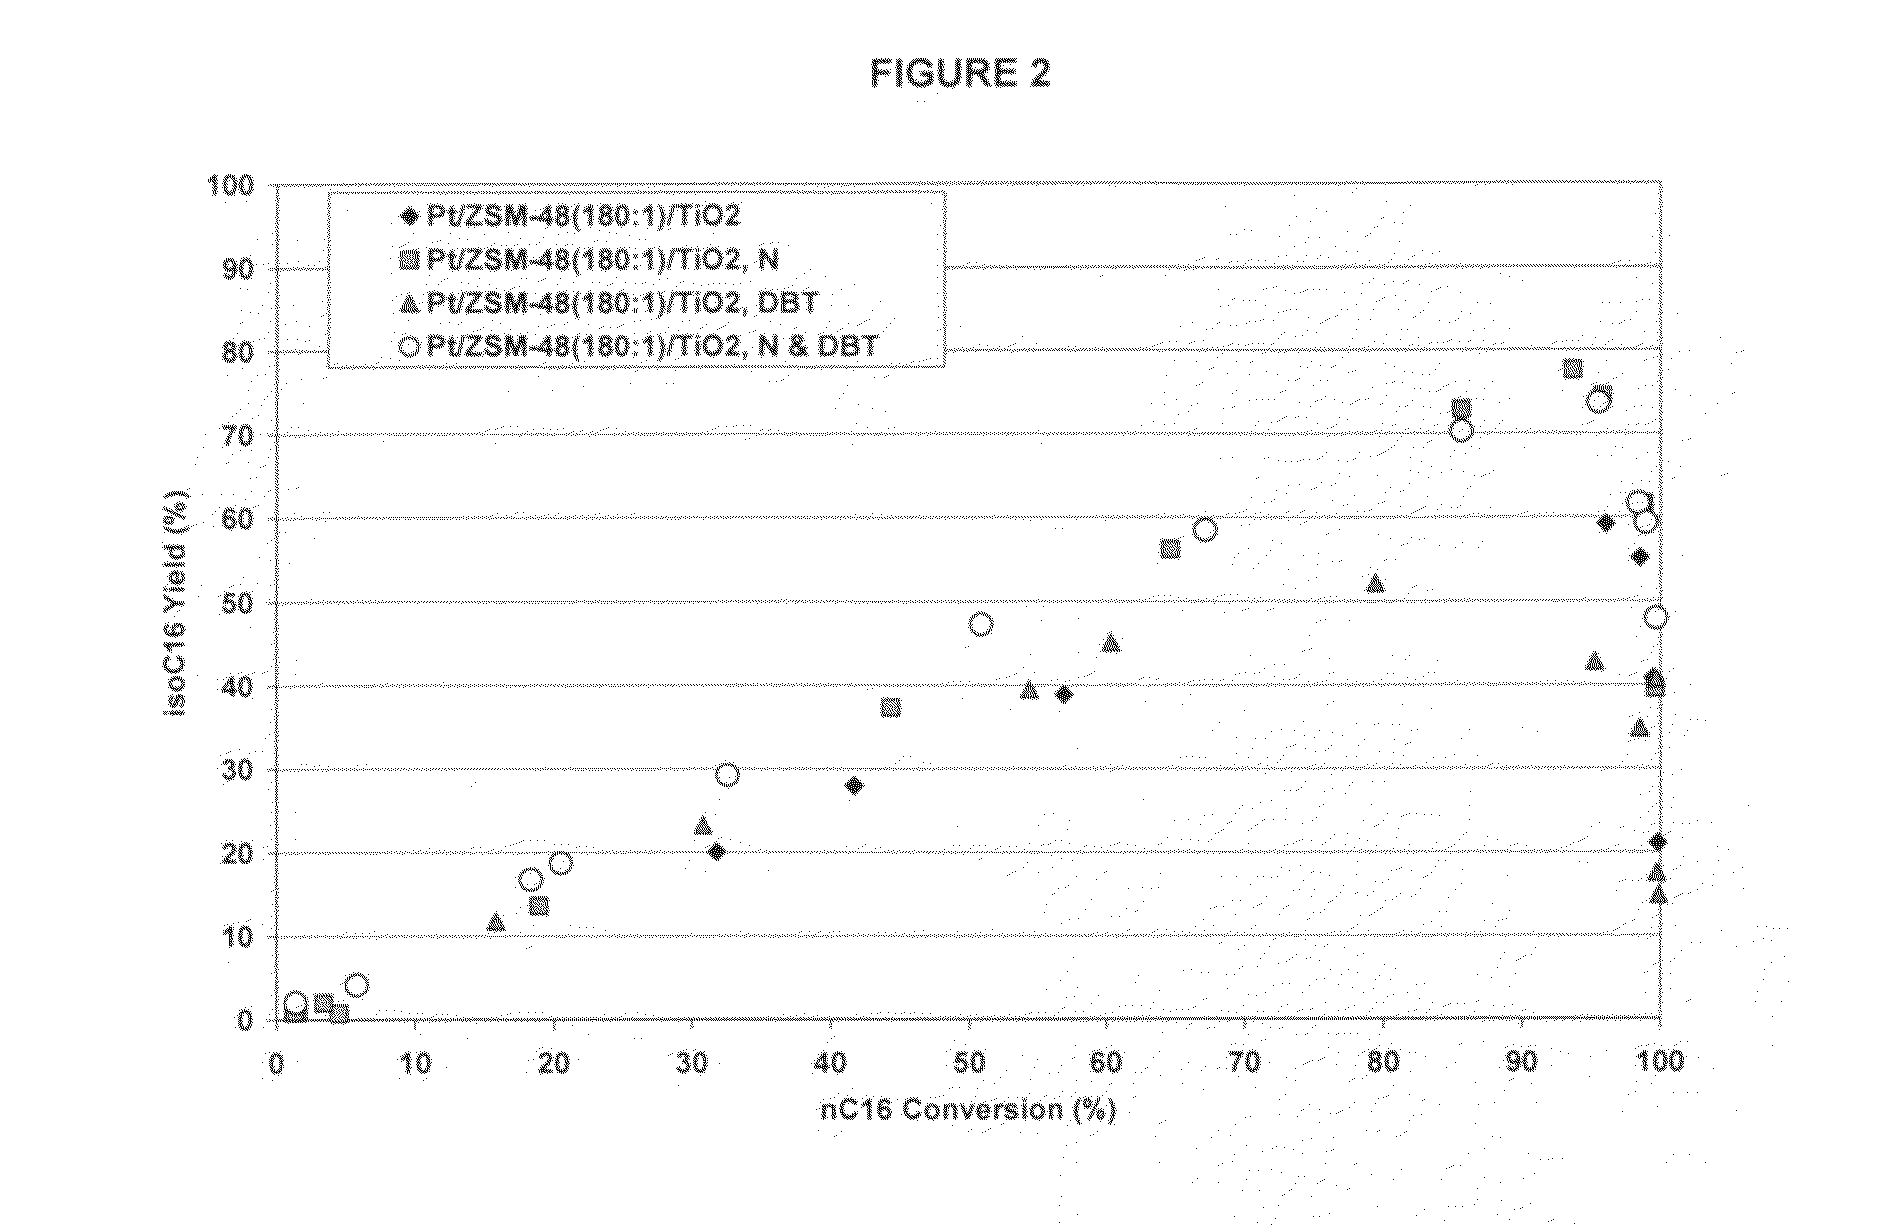 Hydroprocessing catalysts with low surface area binders